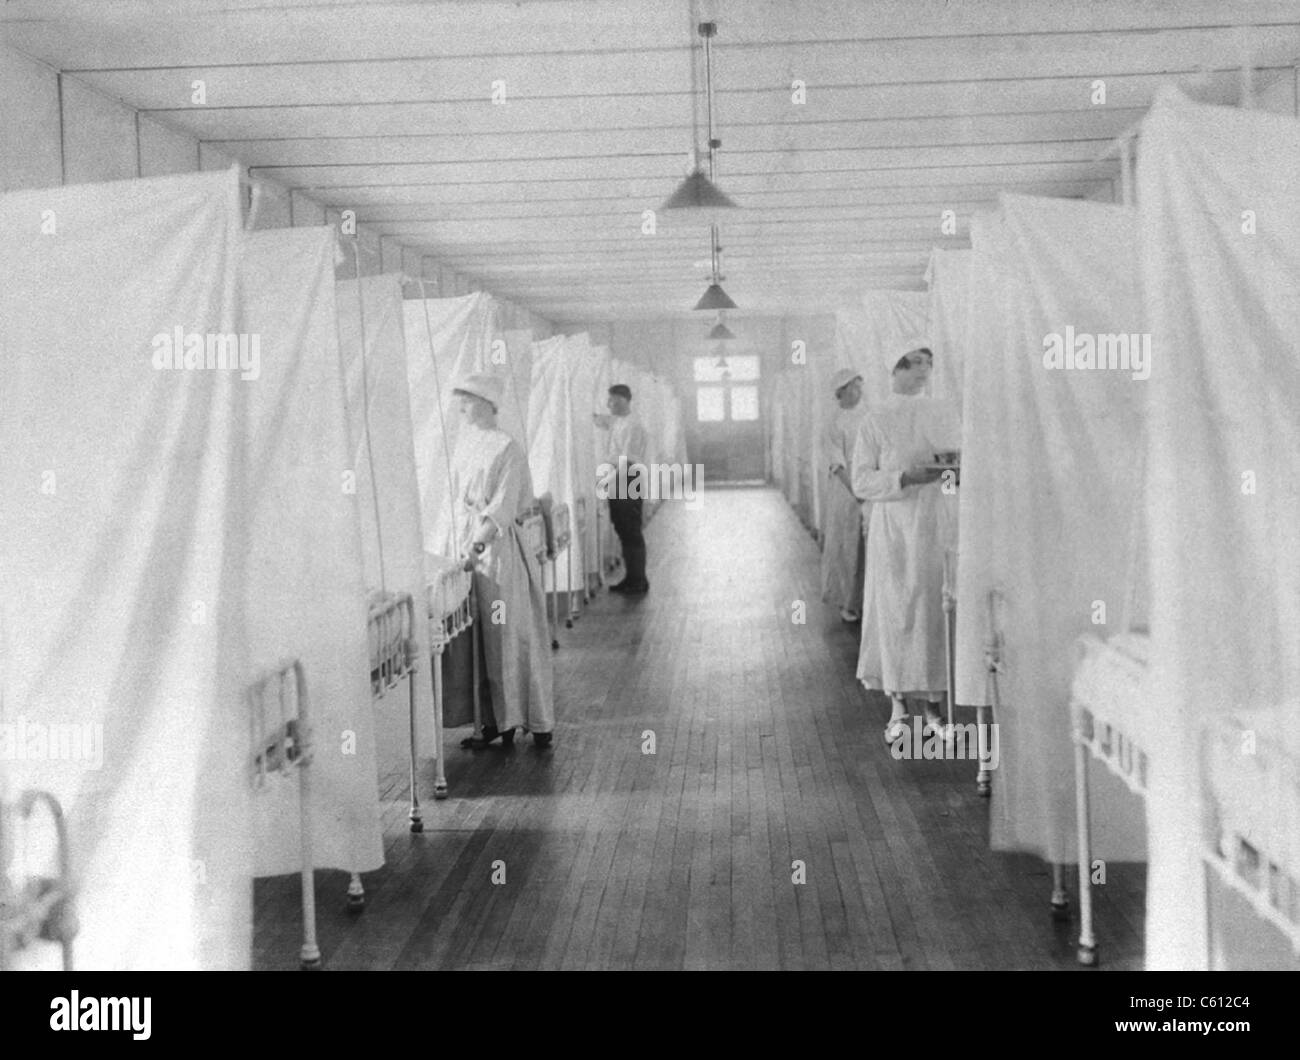 Spanish Flu Epidemic 1918-19. Nurses and orderlies stand by beds separated by sheets to isolate patients in the influenza/pneumonia ward of Walter Reed General Hospital, Washington, D.C. Stock Photo